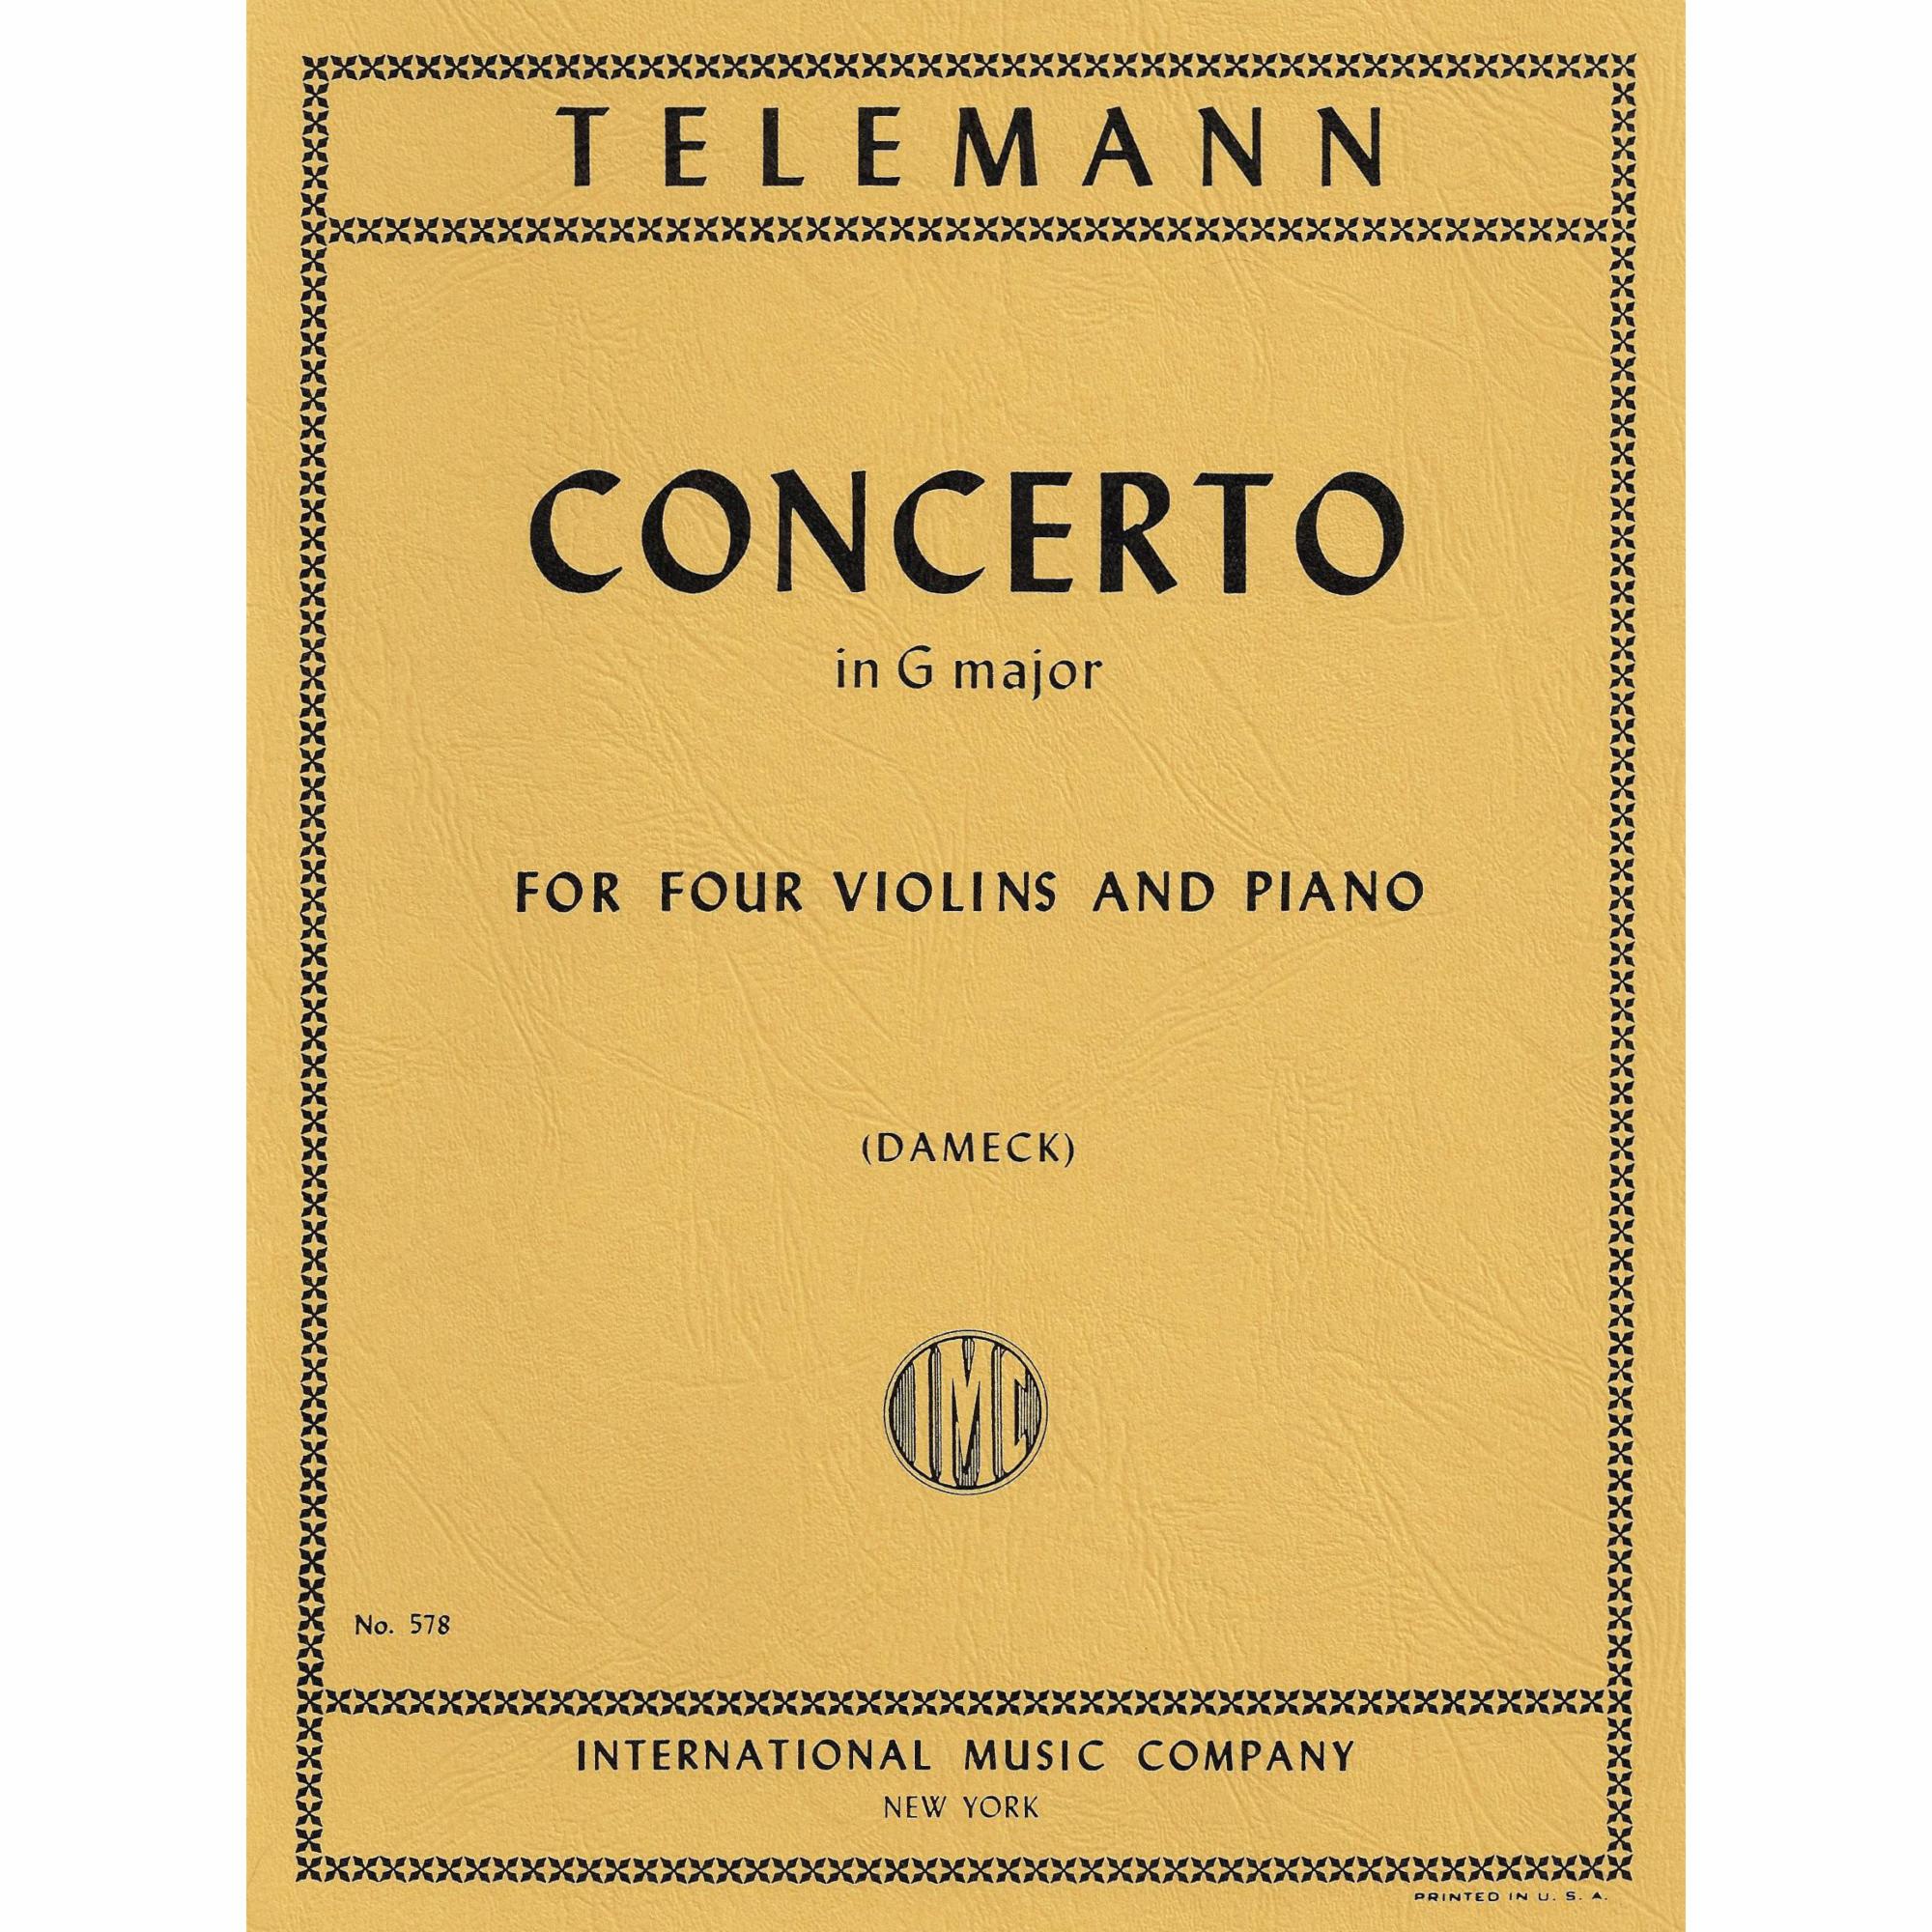 Telemann -- Concerto in G Major for Four Violins and Piano